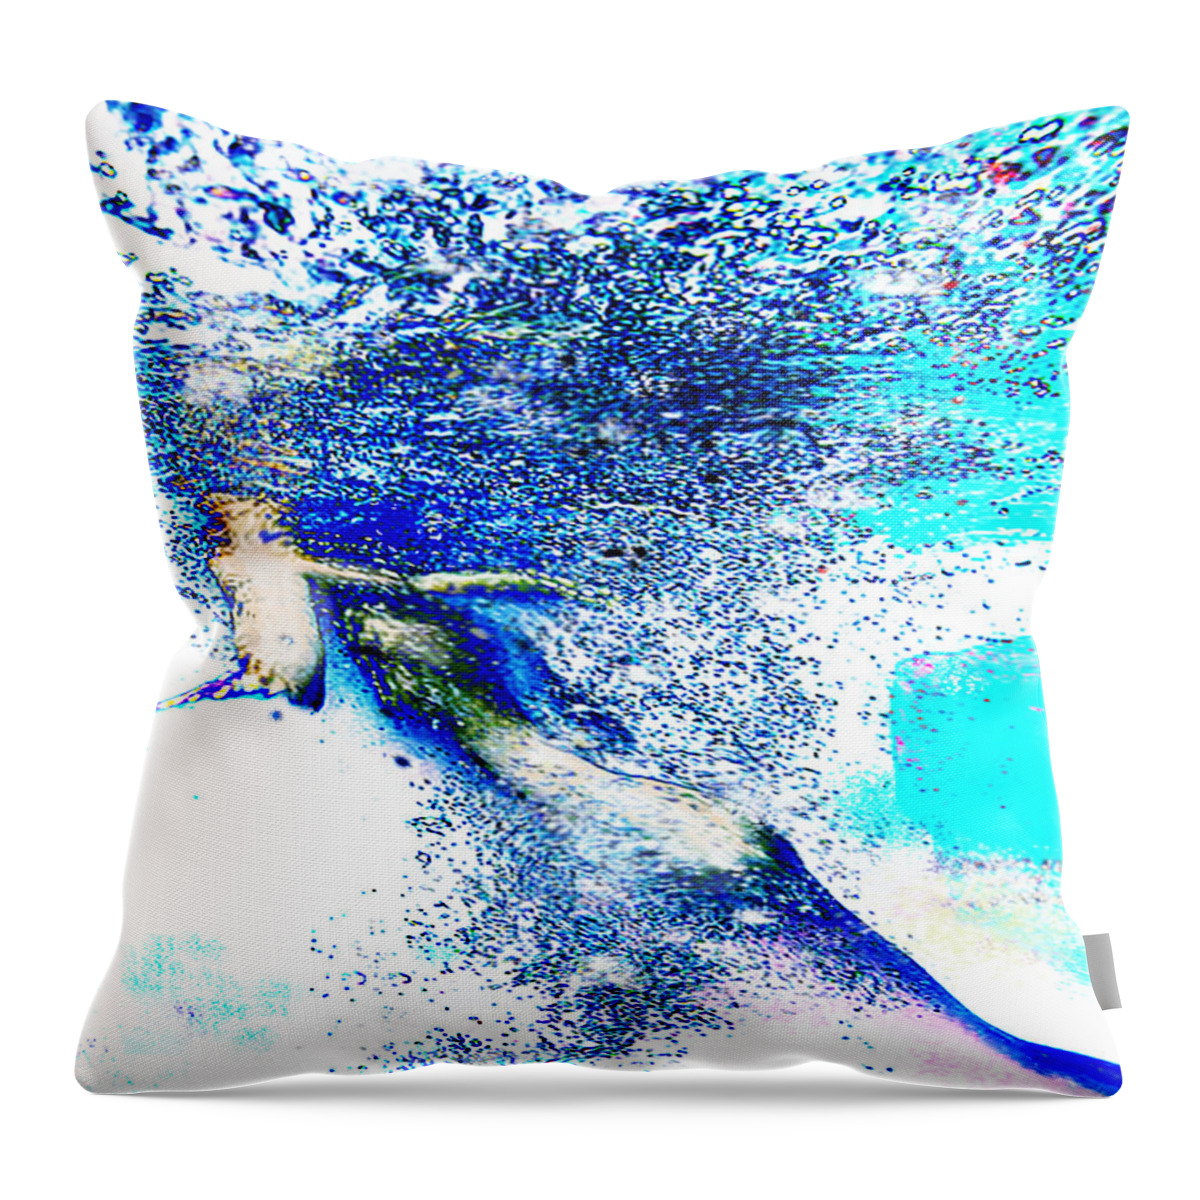 Underwater Throw Pillow featuring the digital art Engulfed in a Curning Bubble Mass by Leo Malboeuf